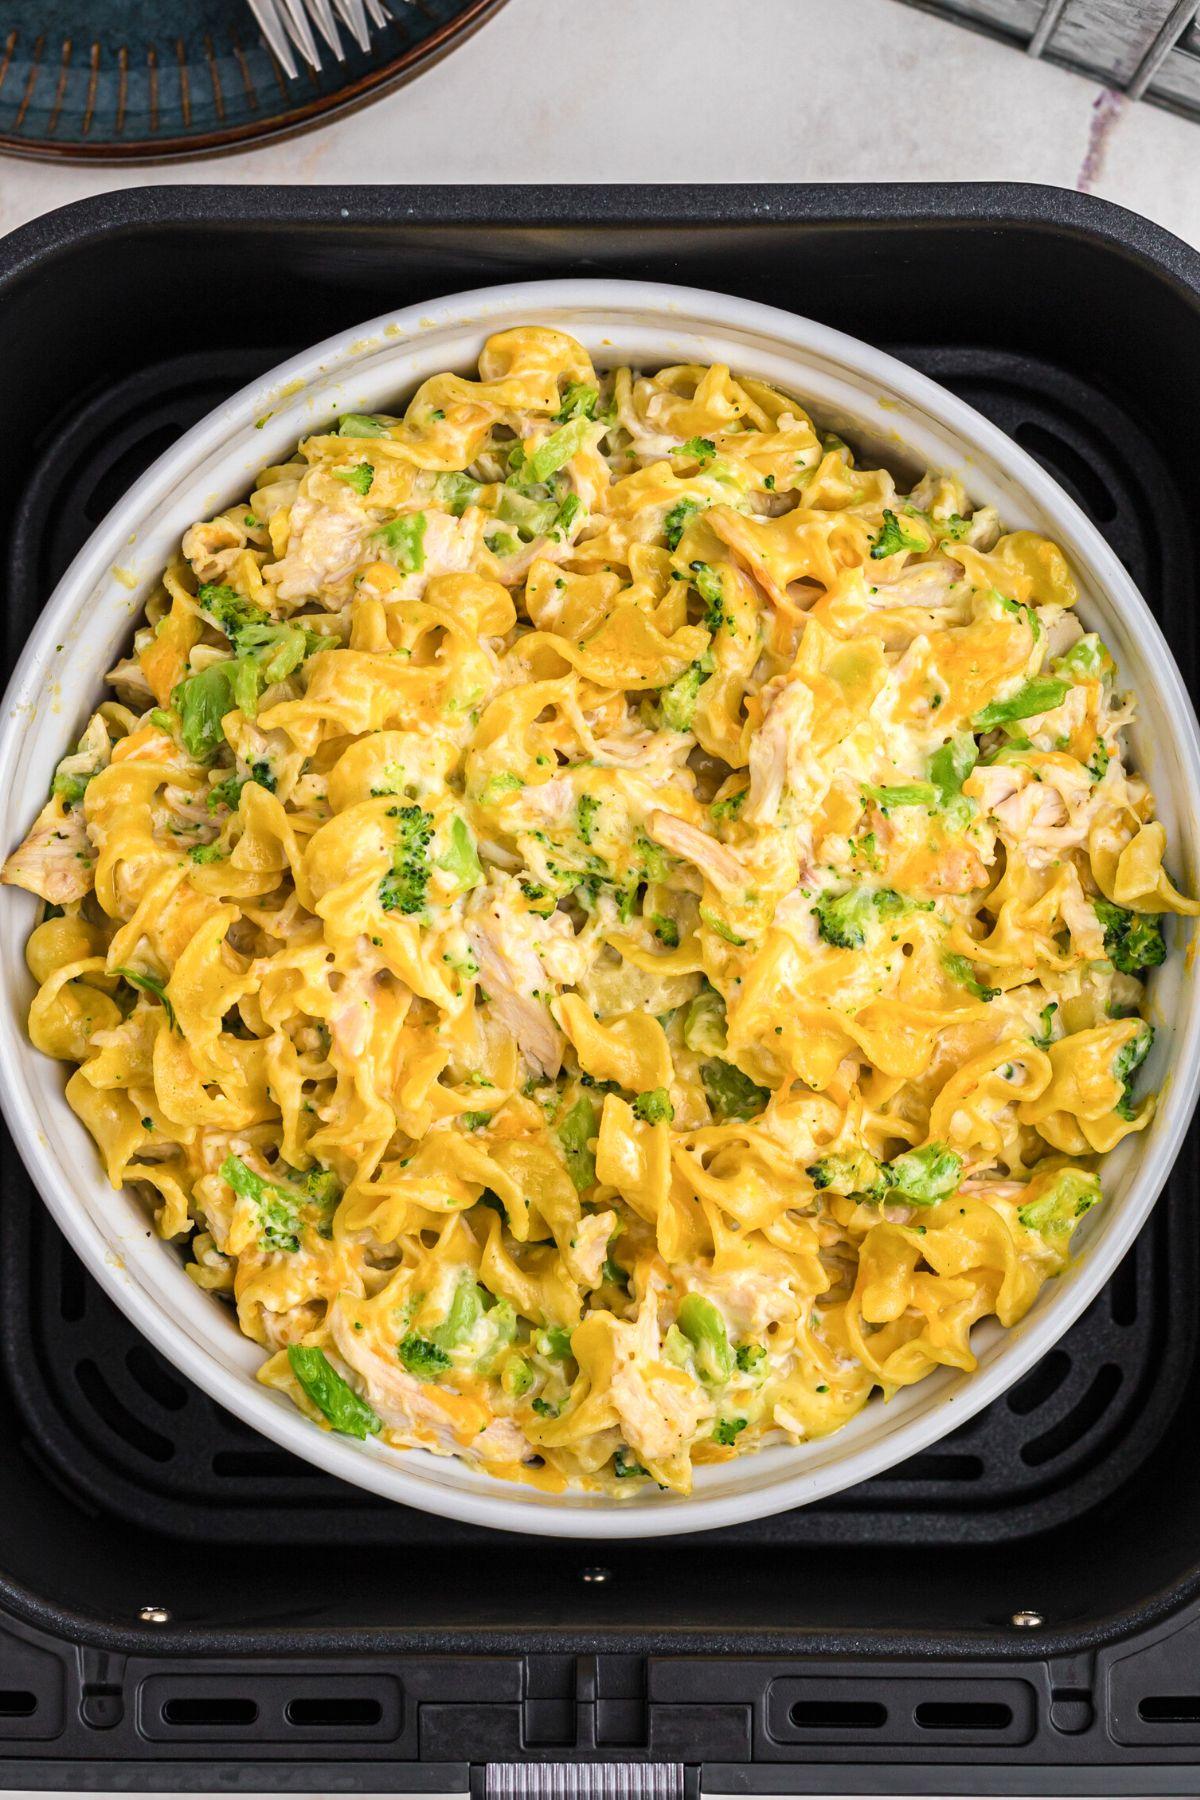 Golden cheesy pasta and chicken mixed in a casserole dish in the air fryer basket